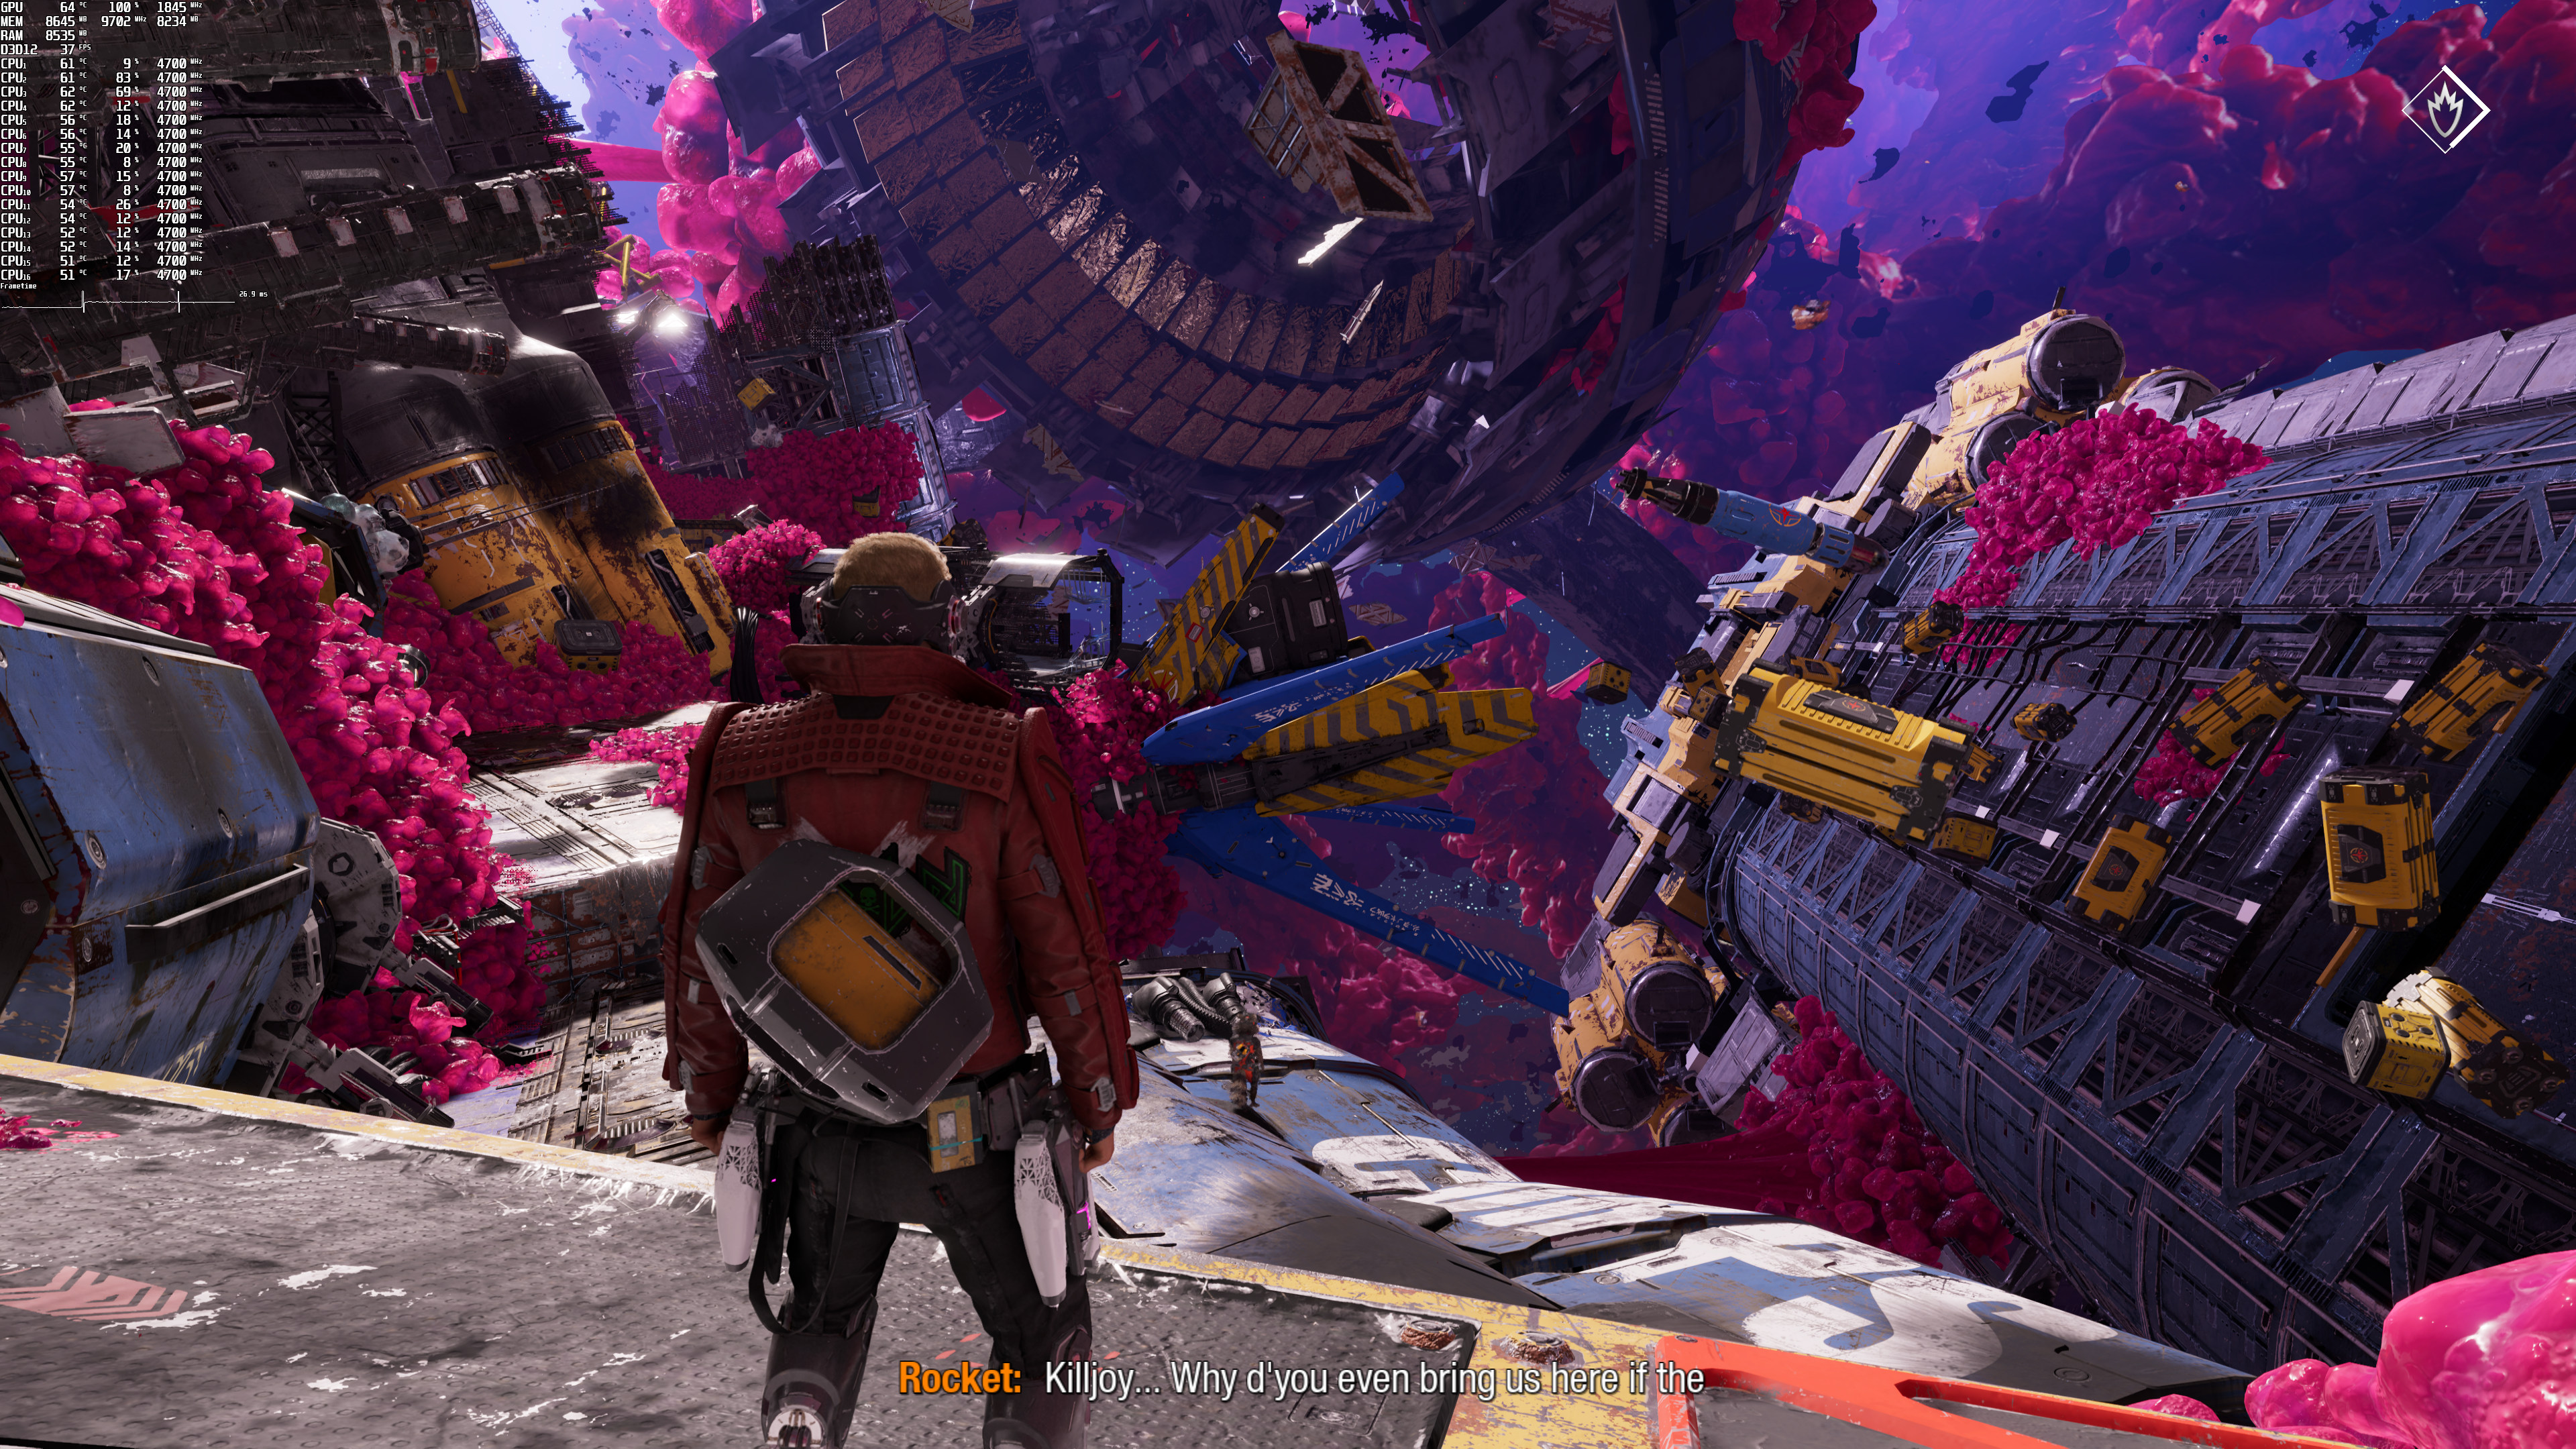 Marvel's Guardians of the Galaxy Gets Ray Tracing Mode in New PS5 Update